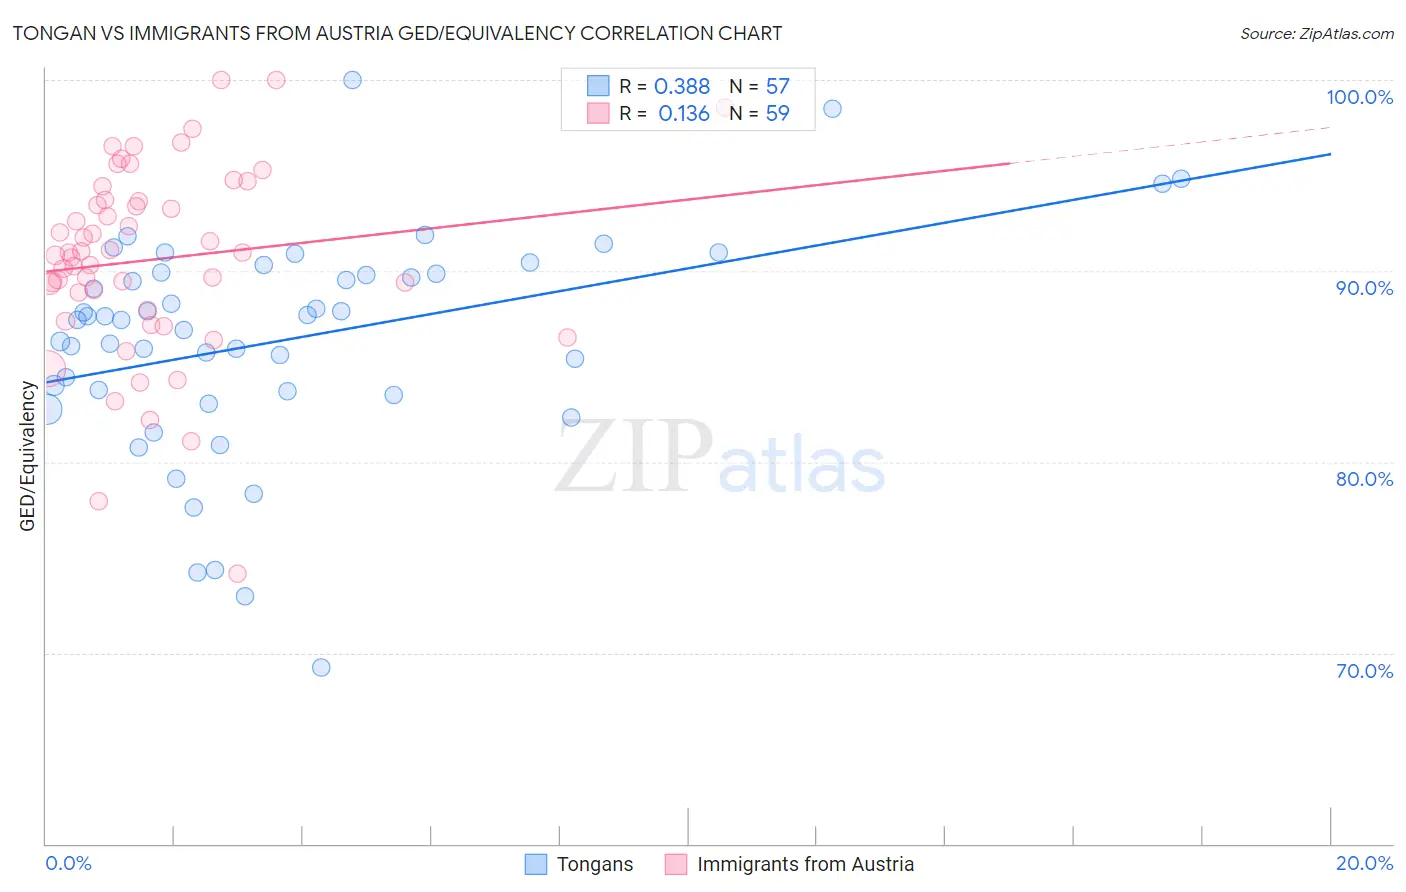 Tongan vs Immigrants from Austria GED/Equivalency